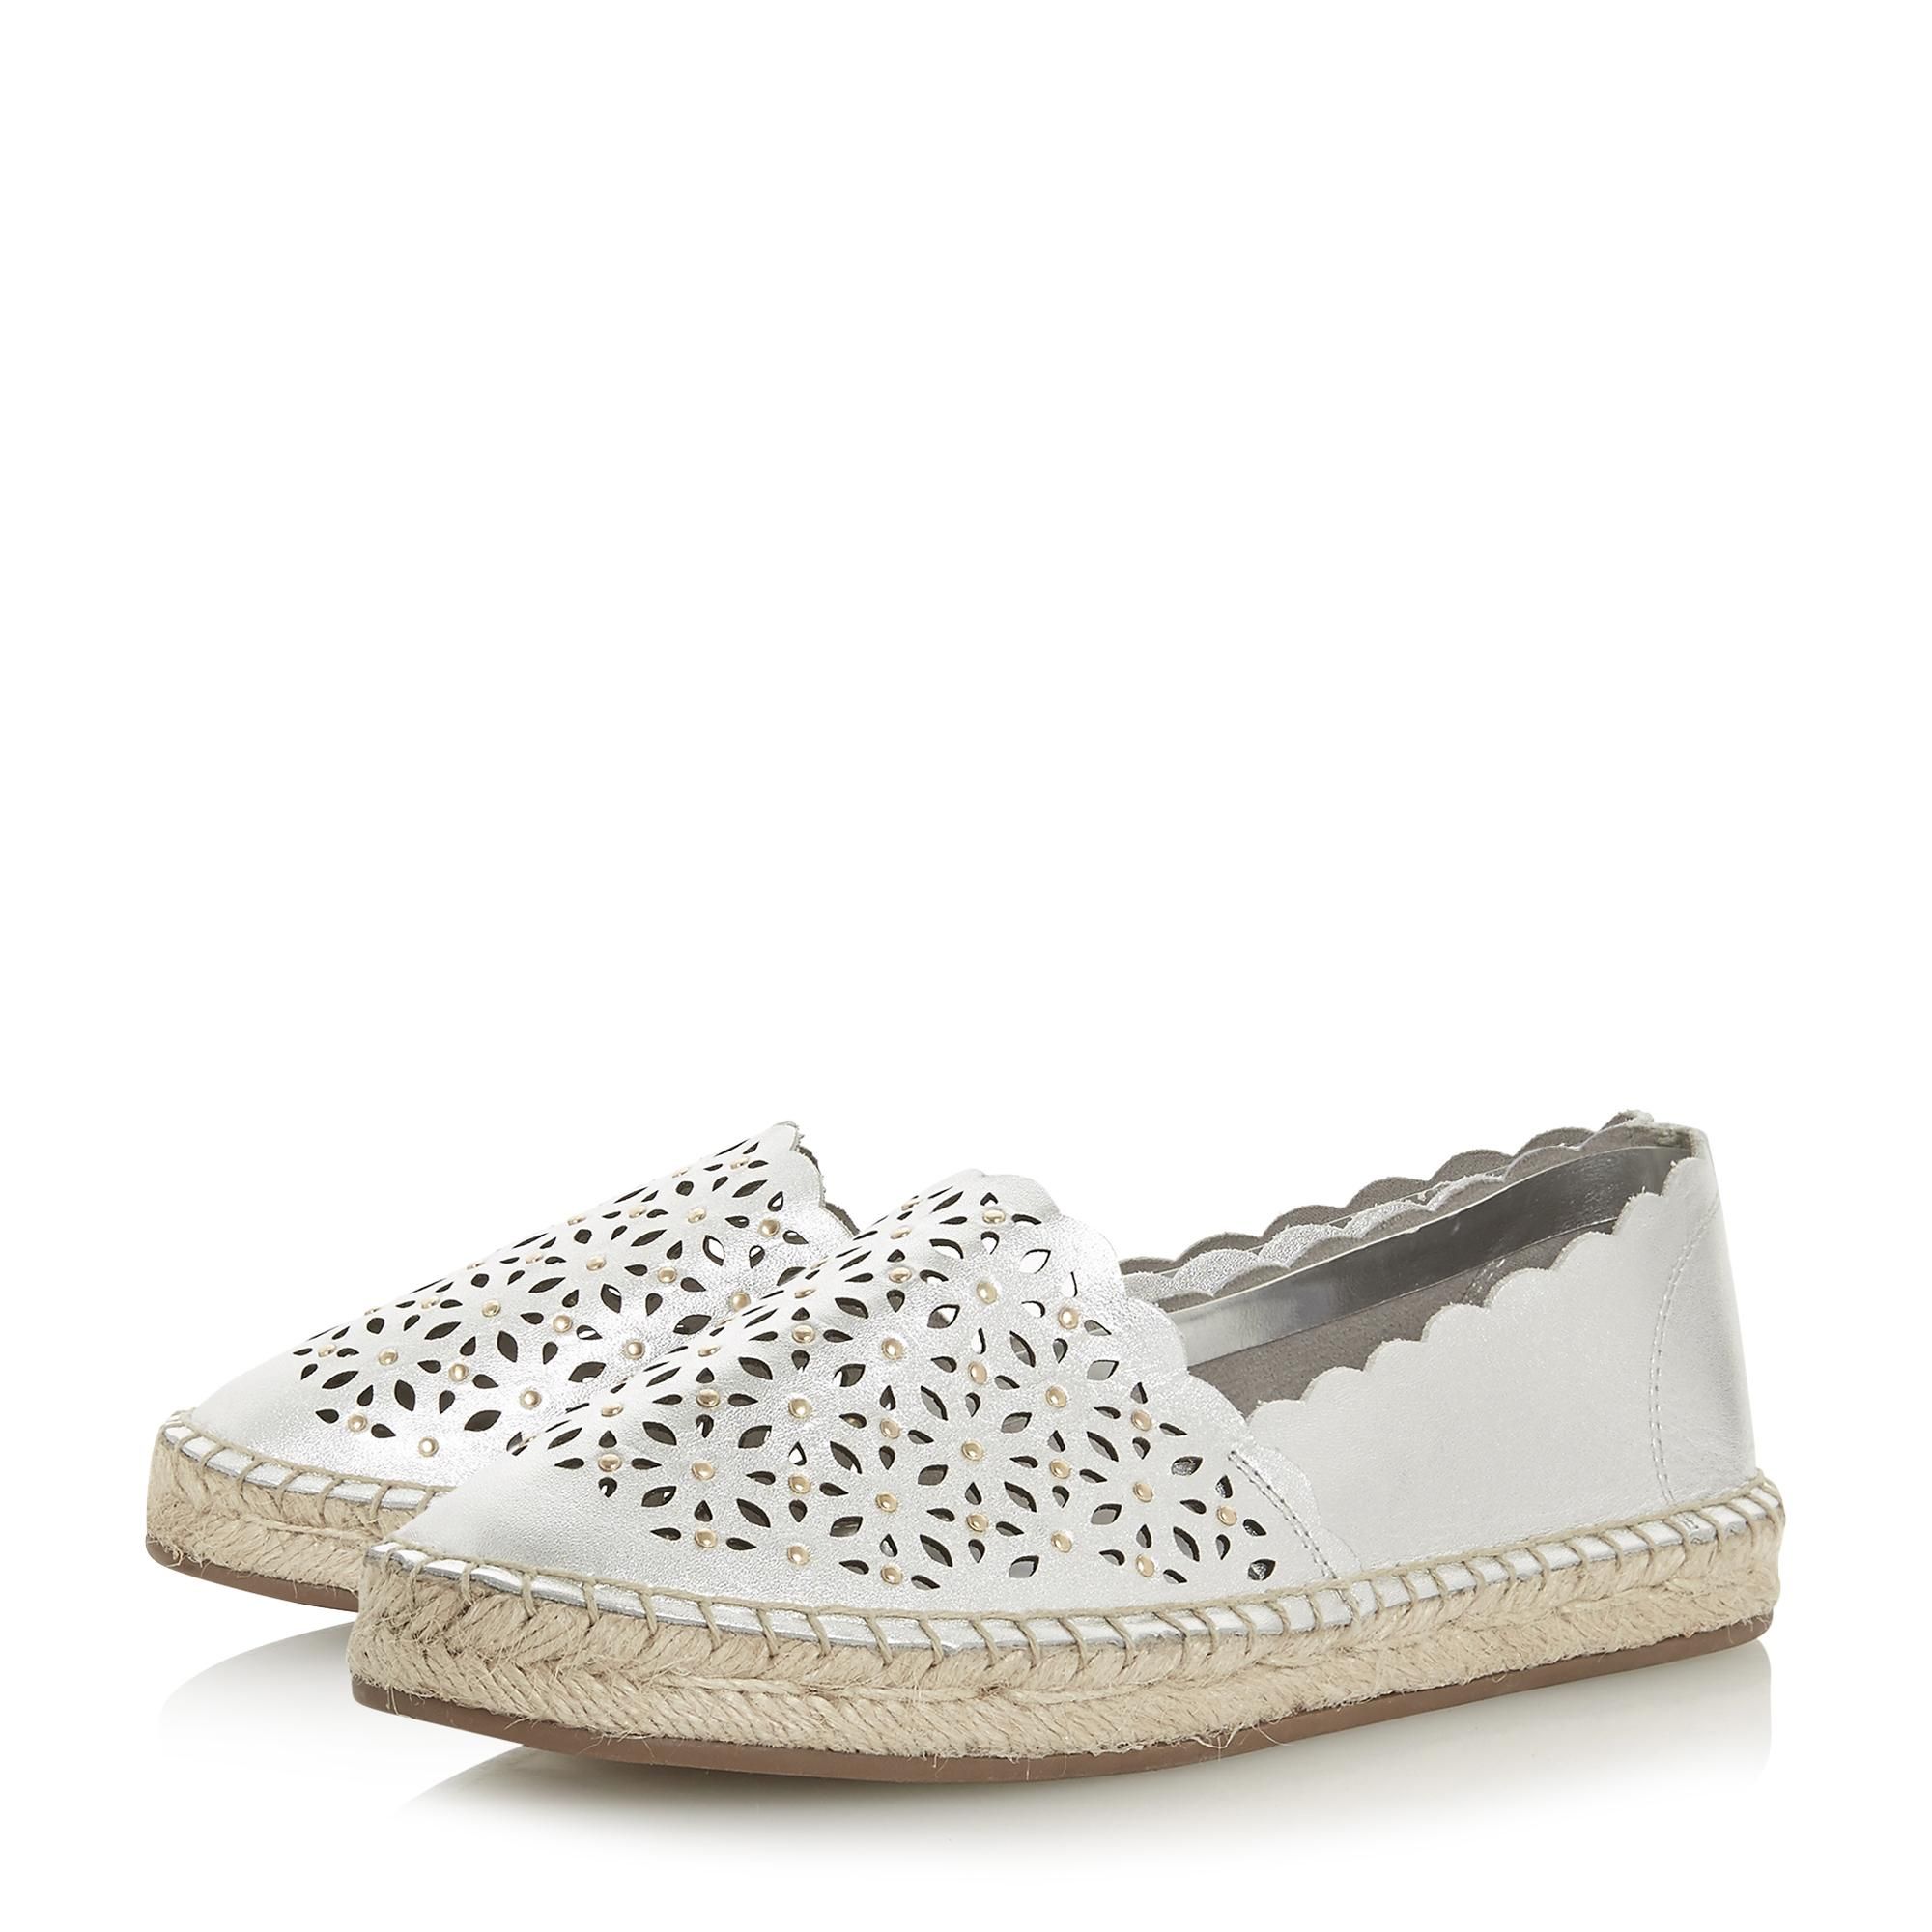 Get your summer shoe fix with Dune's laser cut Gracelynn espadrille. Eye-catching with its intricate cut out detail and scallop trim. Wear with daytime outfits for a chic look.